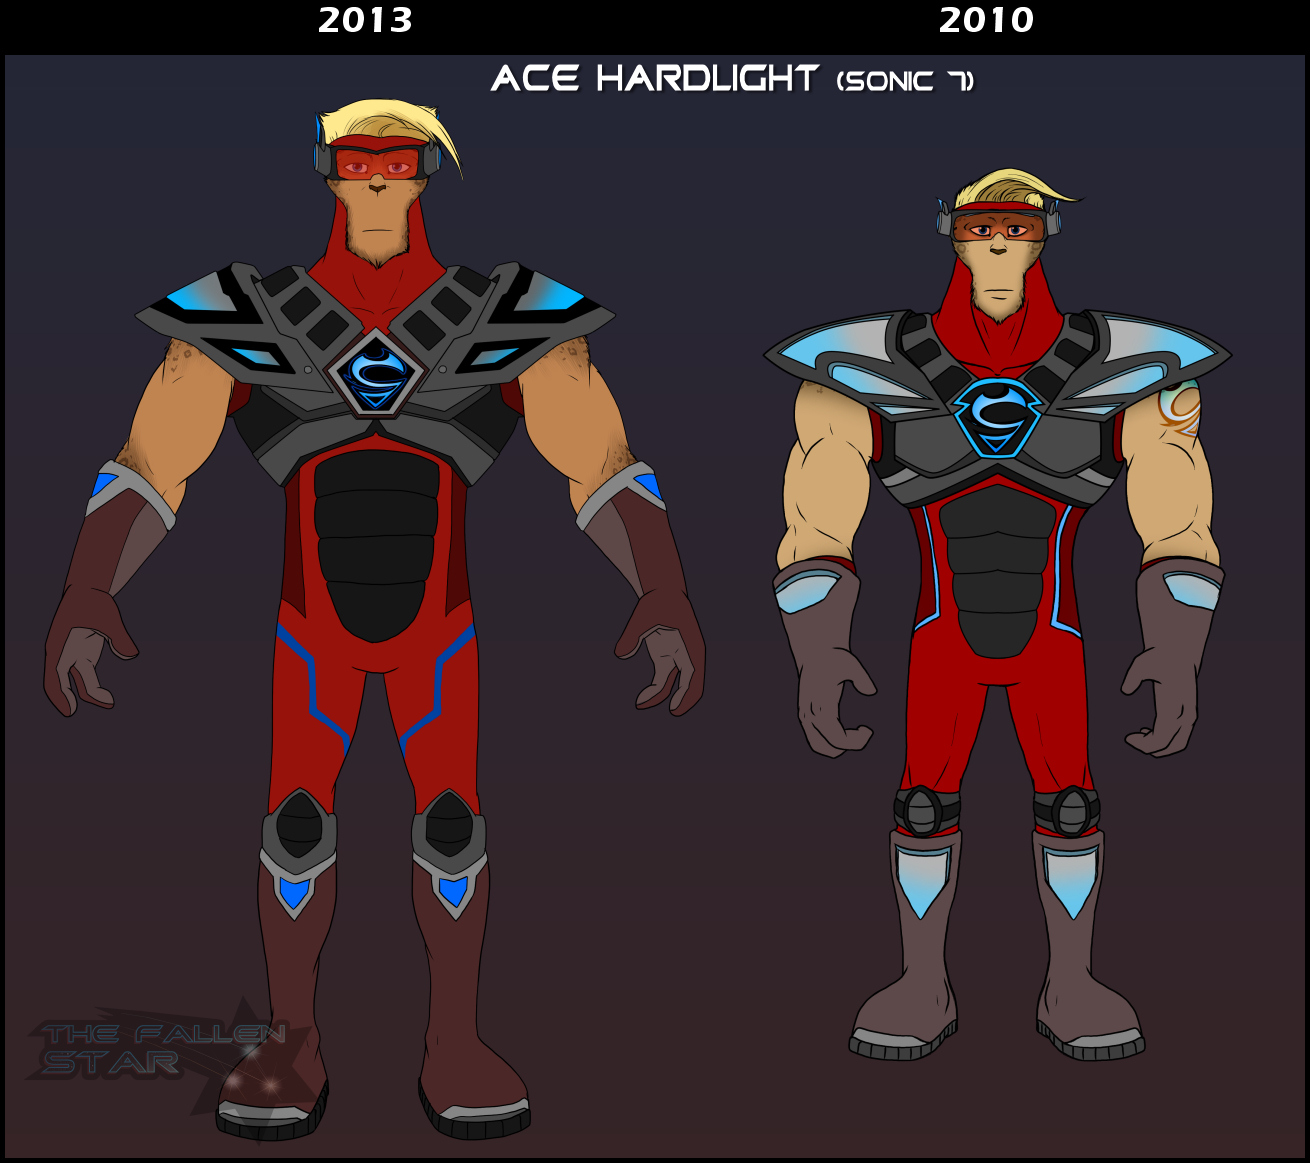 Front drawing comparisons - Ace Hardlight (Sonic 7)